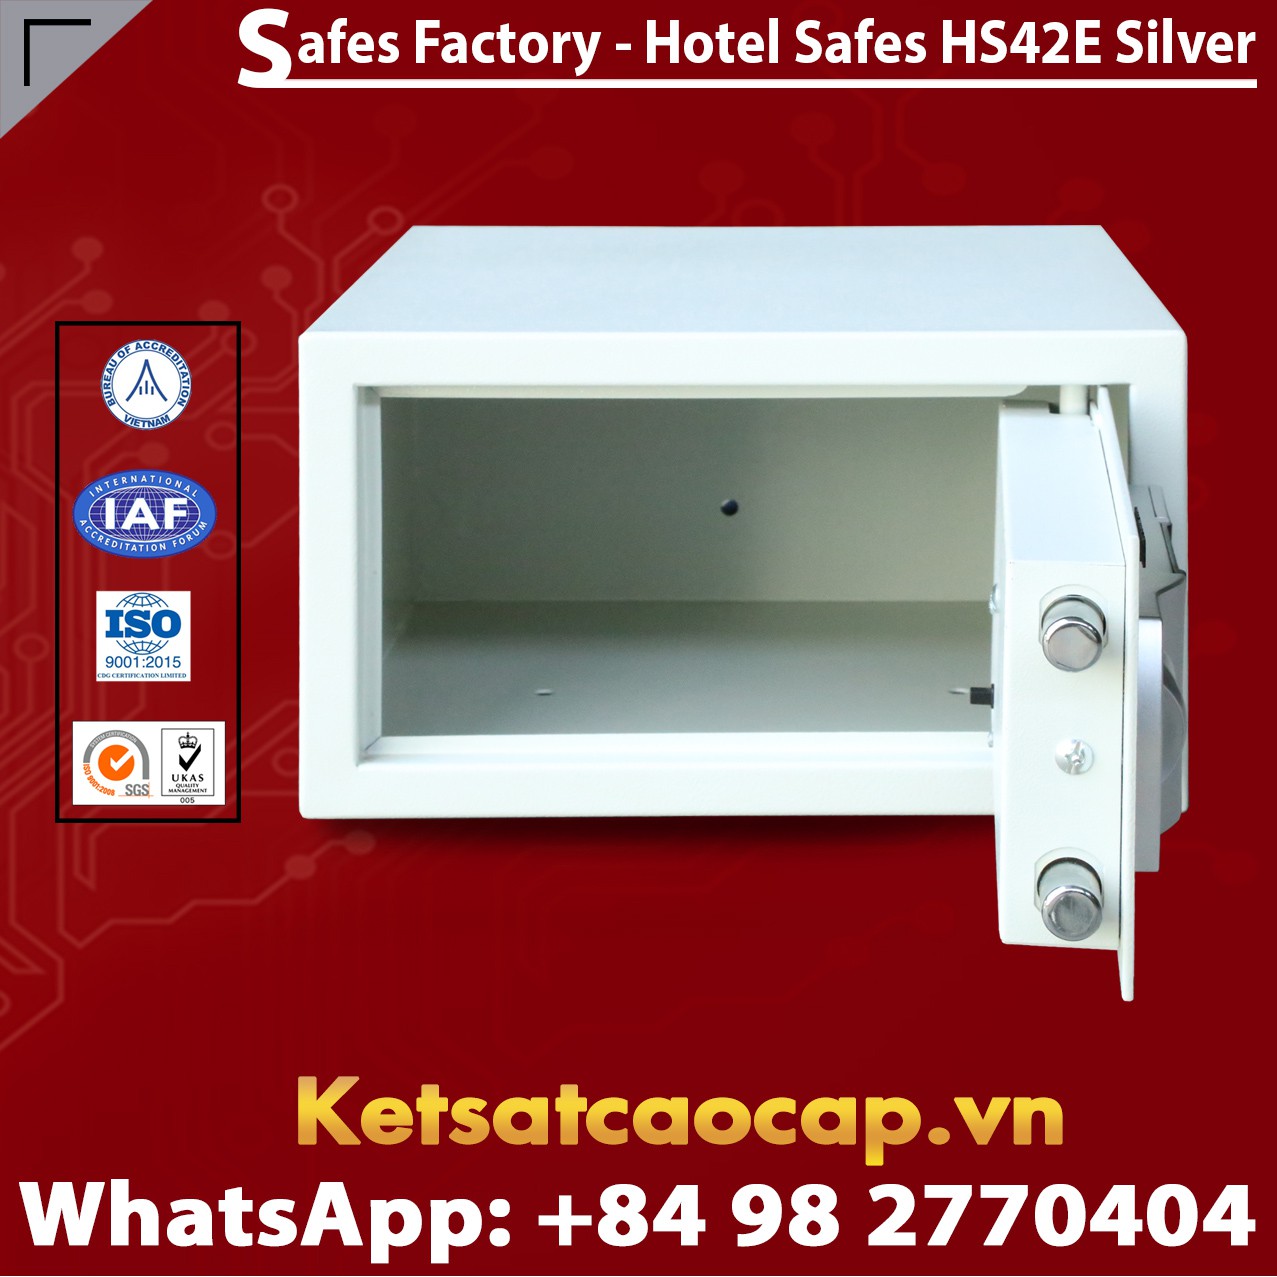 Hotel Room Security Manufacturers & Suppliers‎